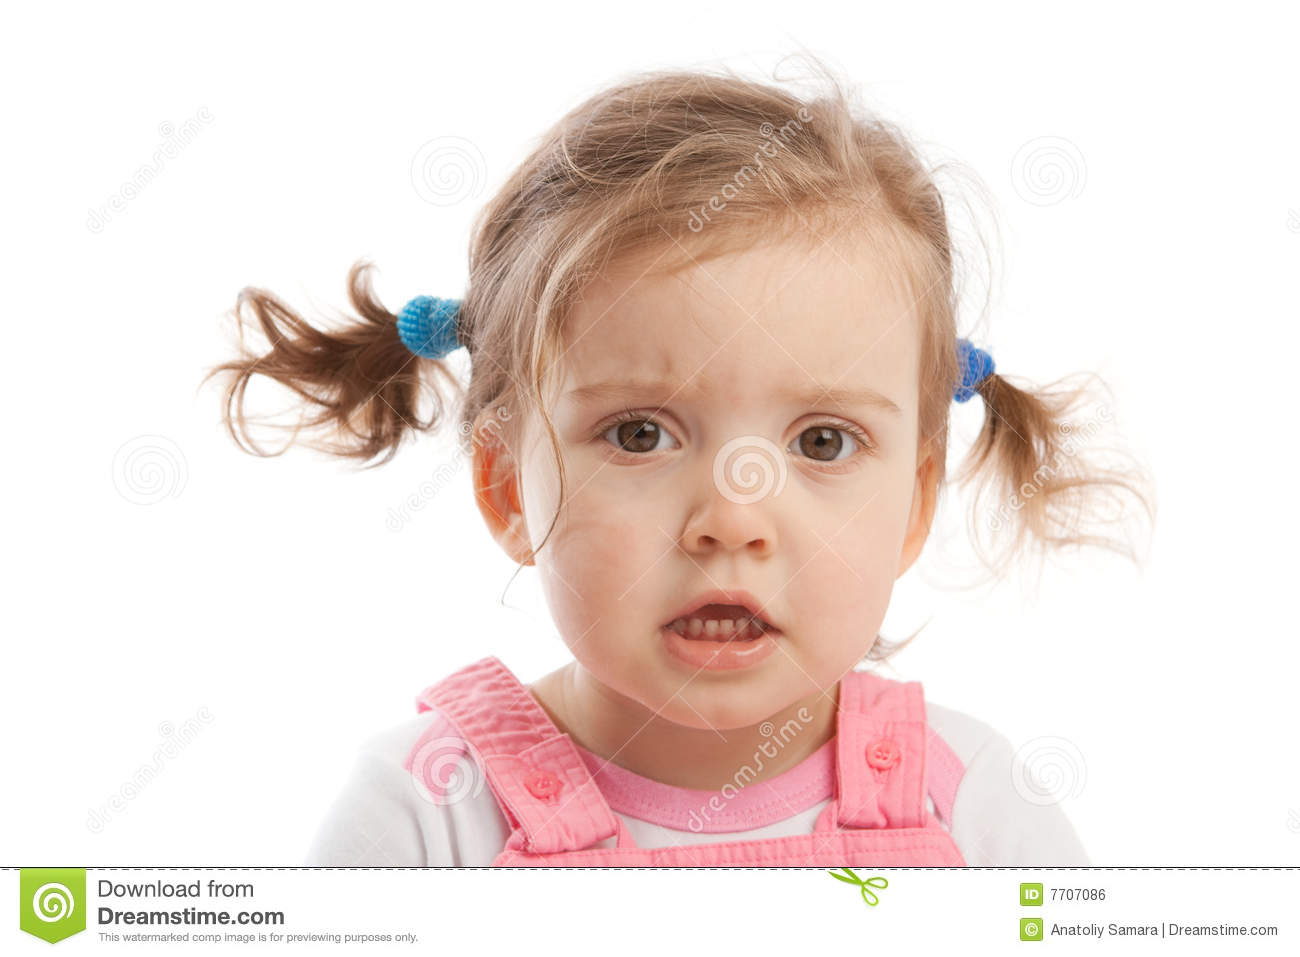 Angry Little Girl Royalty Free Stock Image   Image  7707086